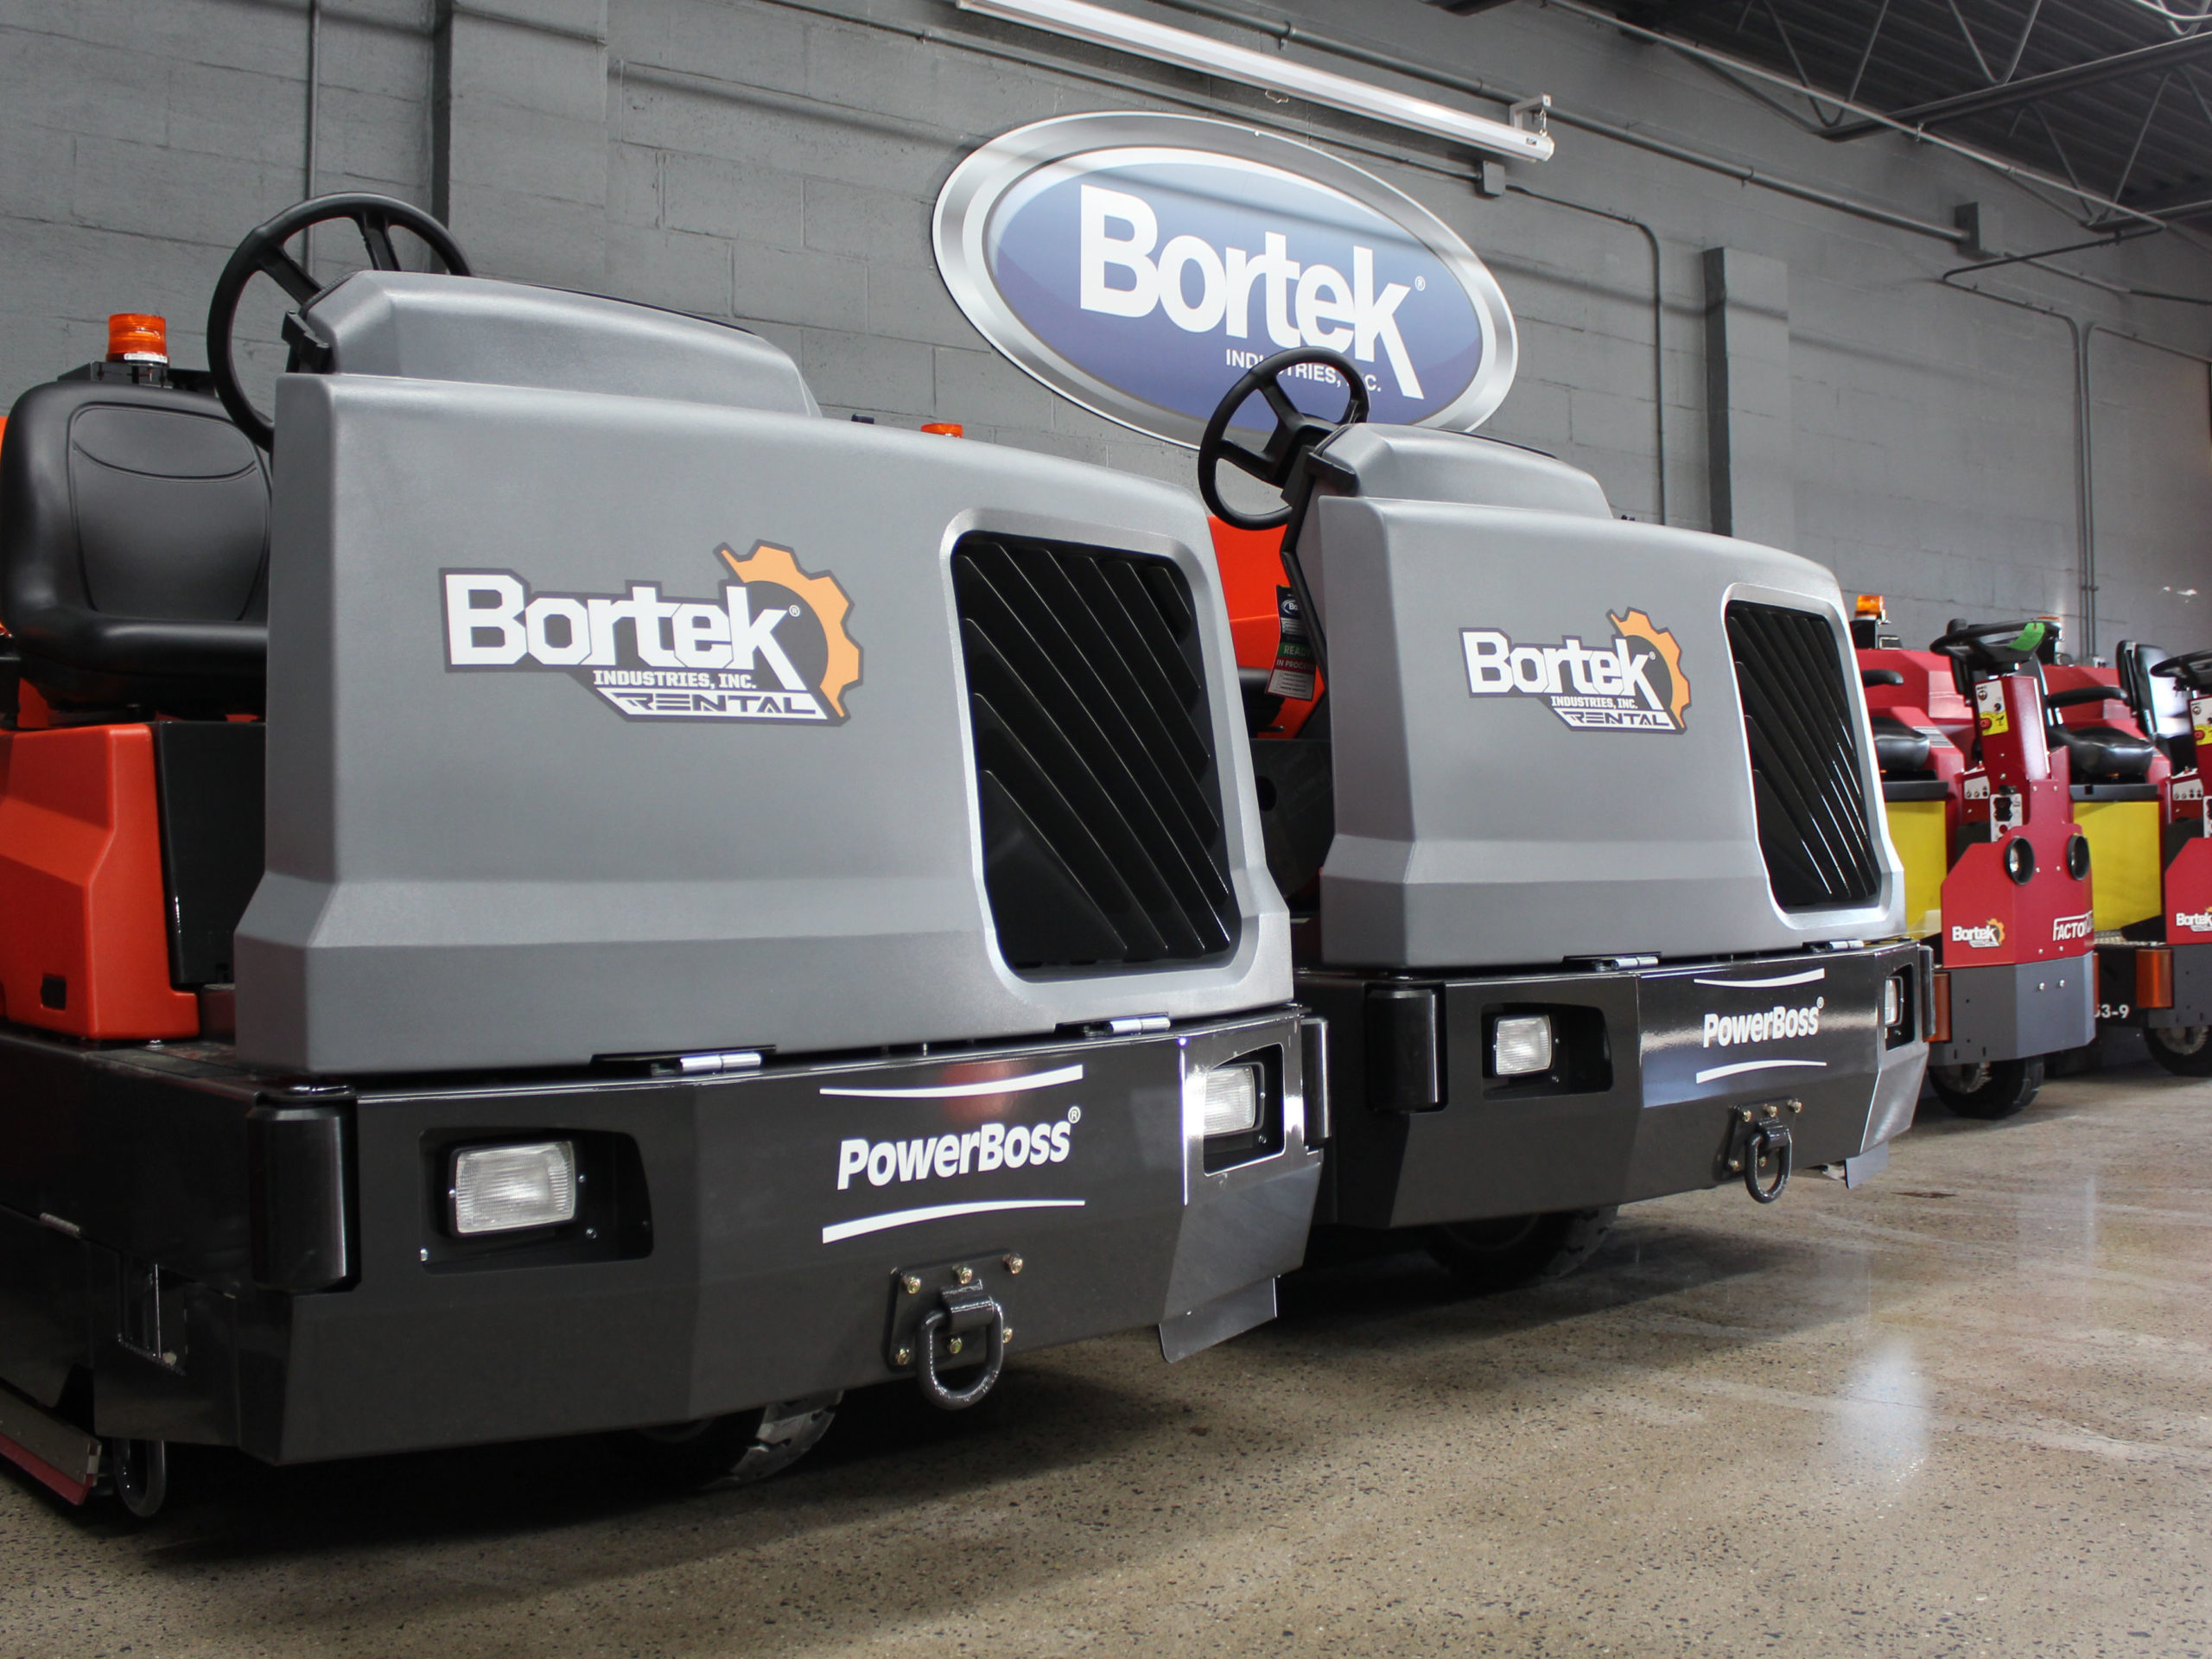 The Different Types of Industrial Floor Cleaning Machines Available